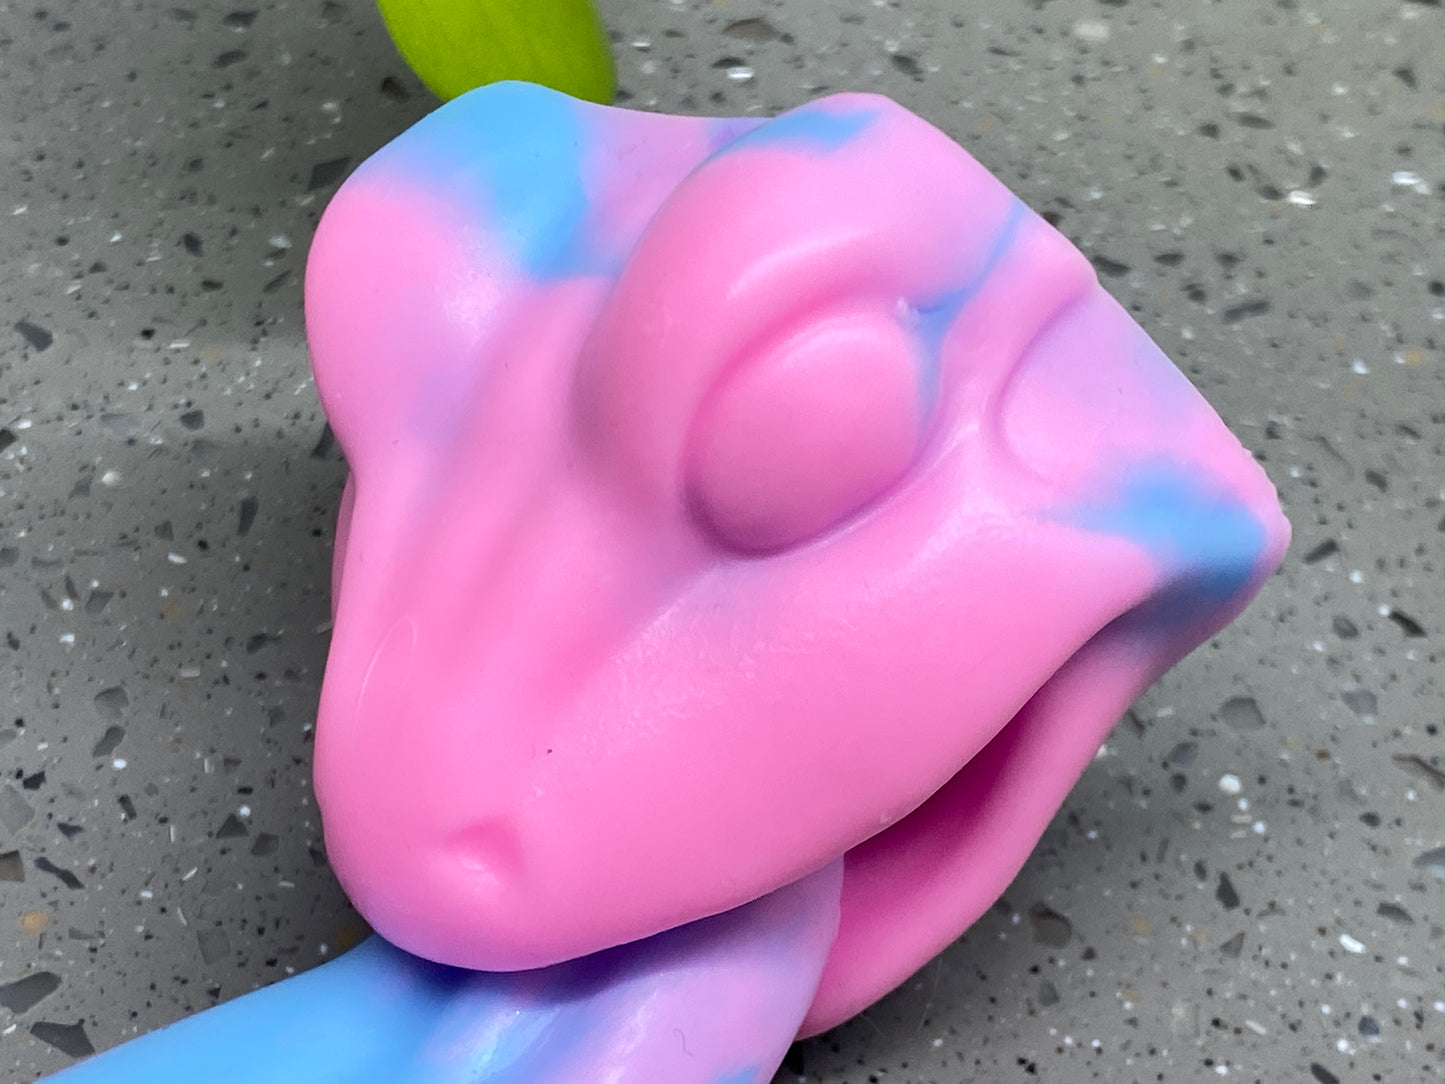 a close up of a pink and blue toy